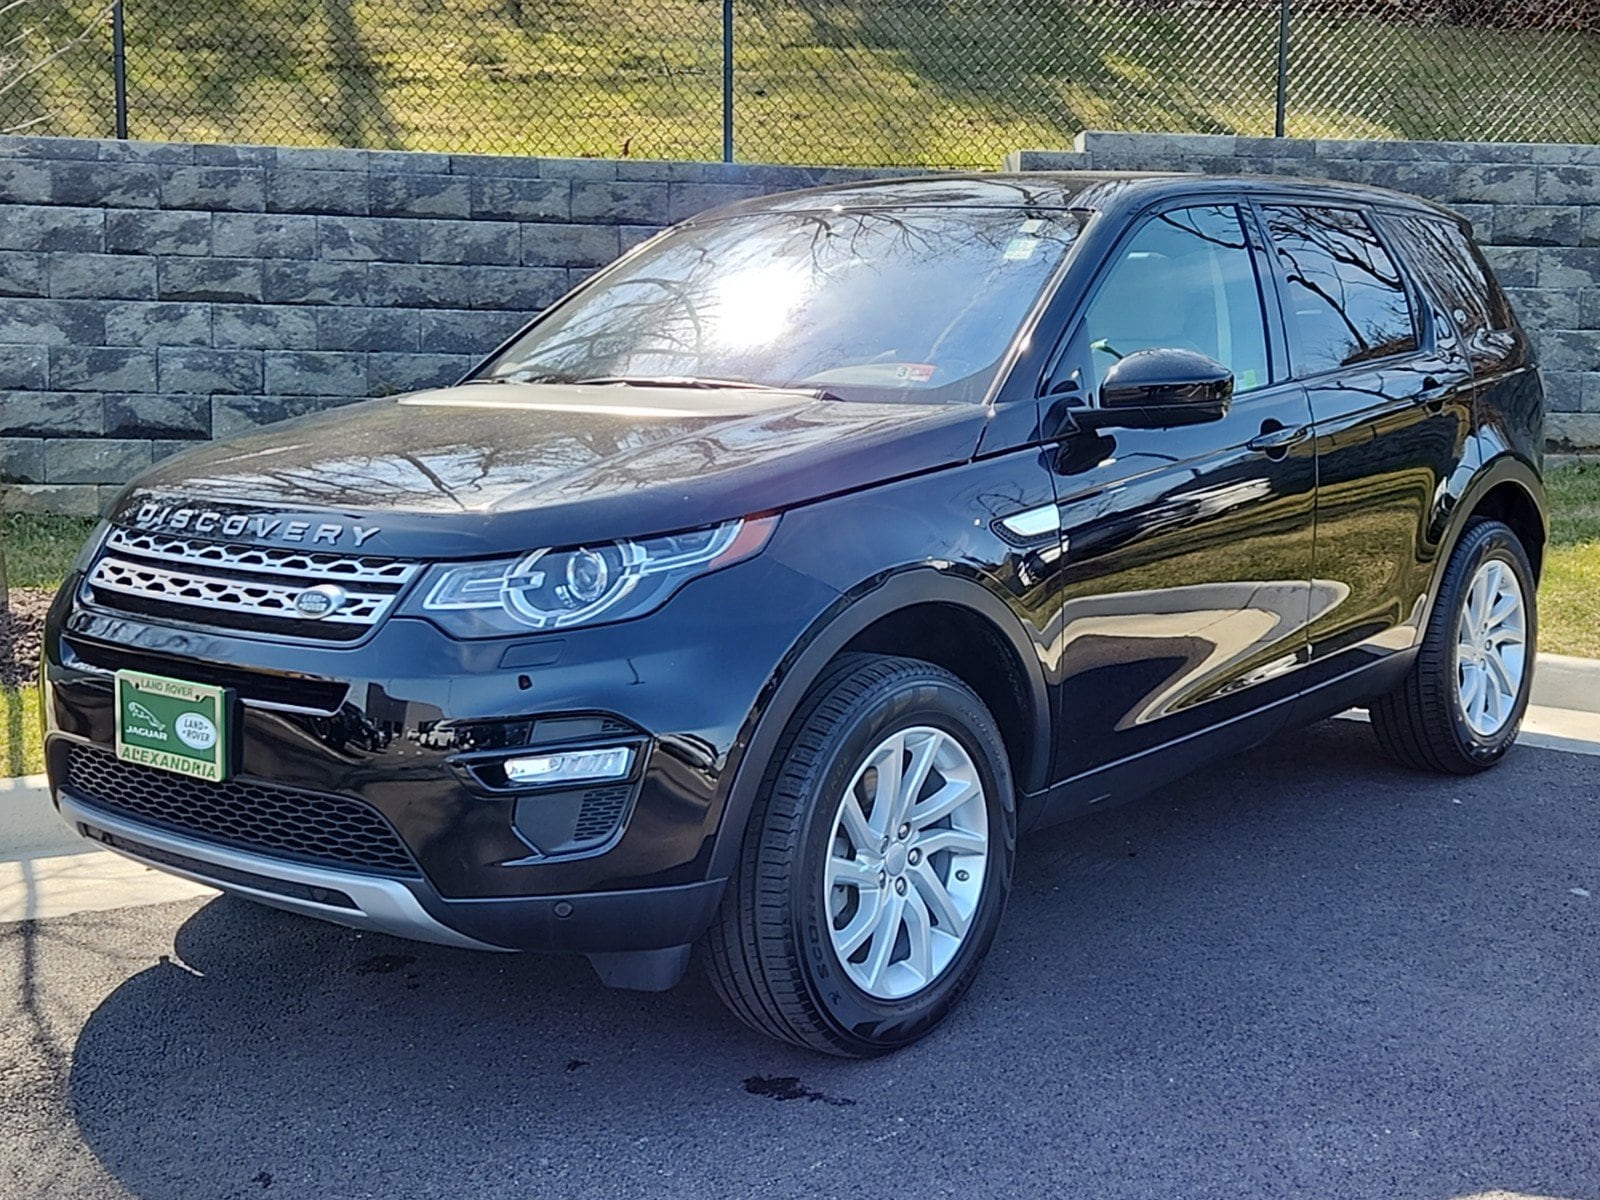 Certified Used 2019 Land Rover Discovery Sport HSE For Sale | Alexandria VA